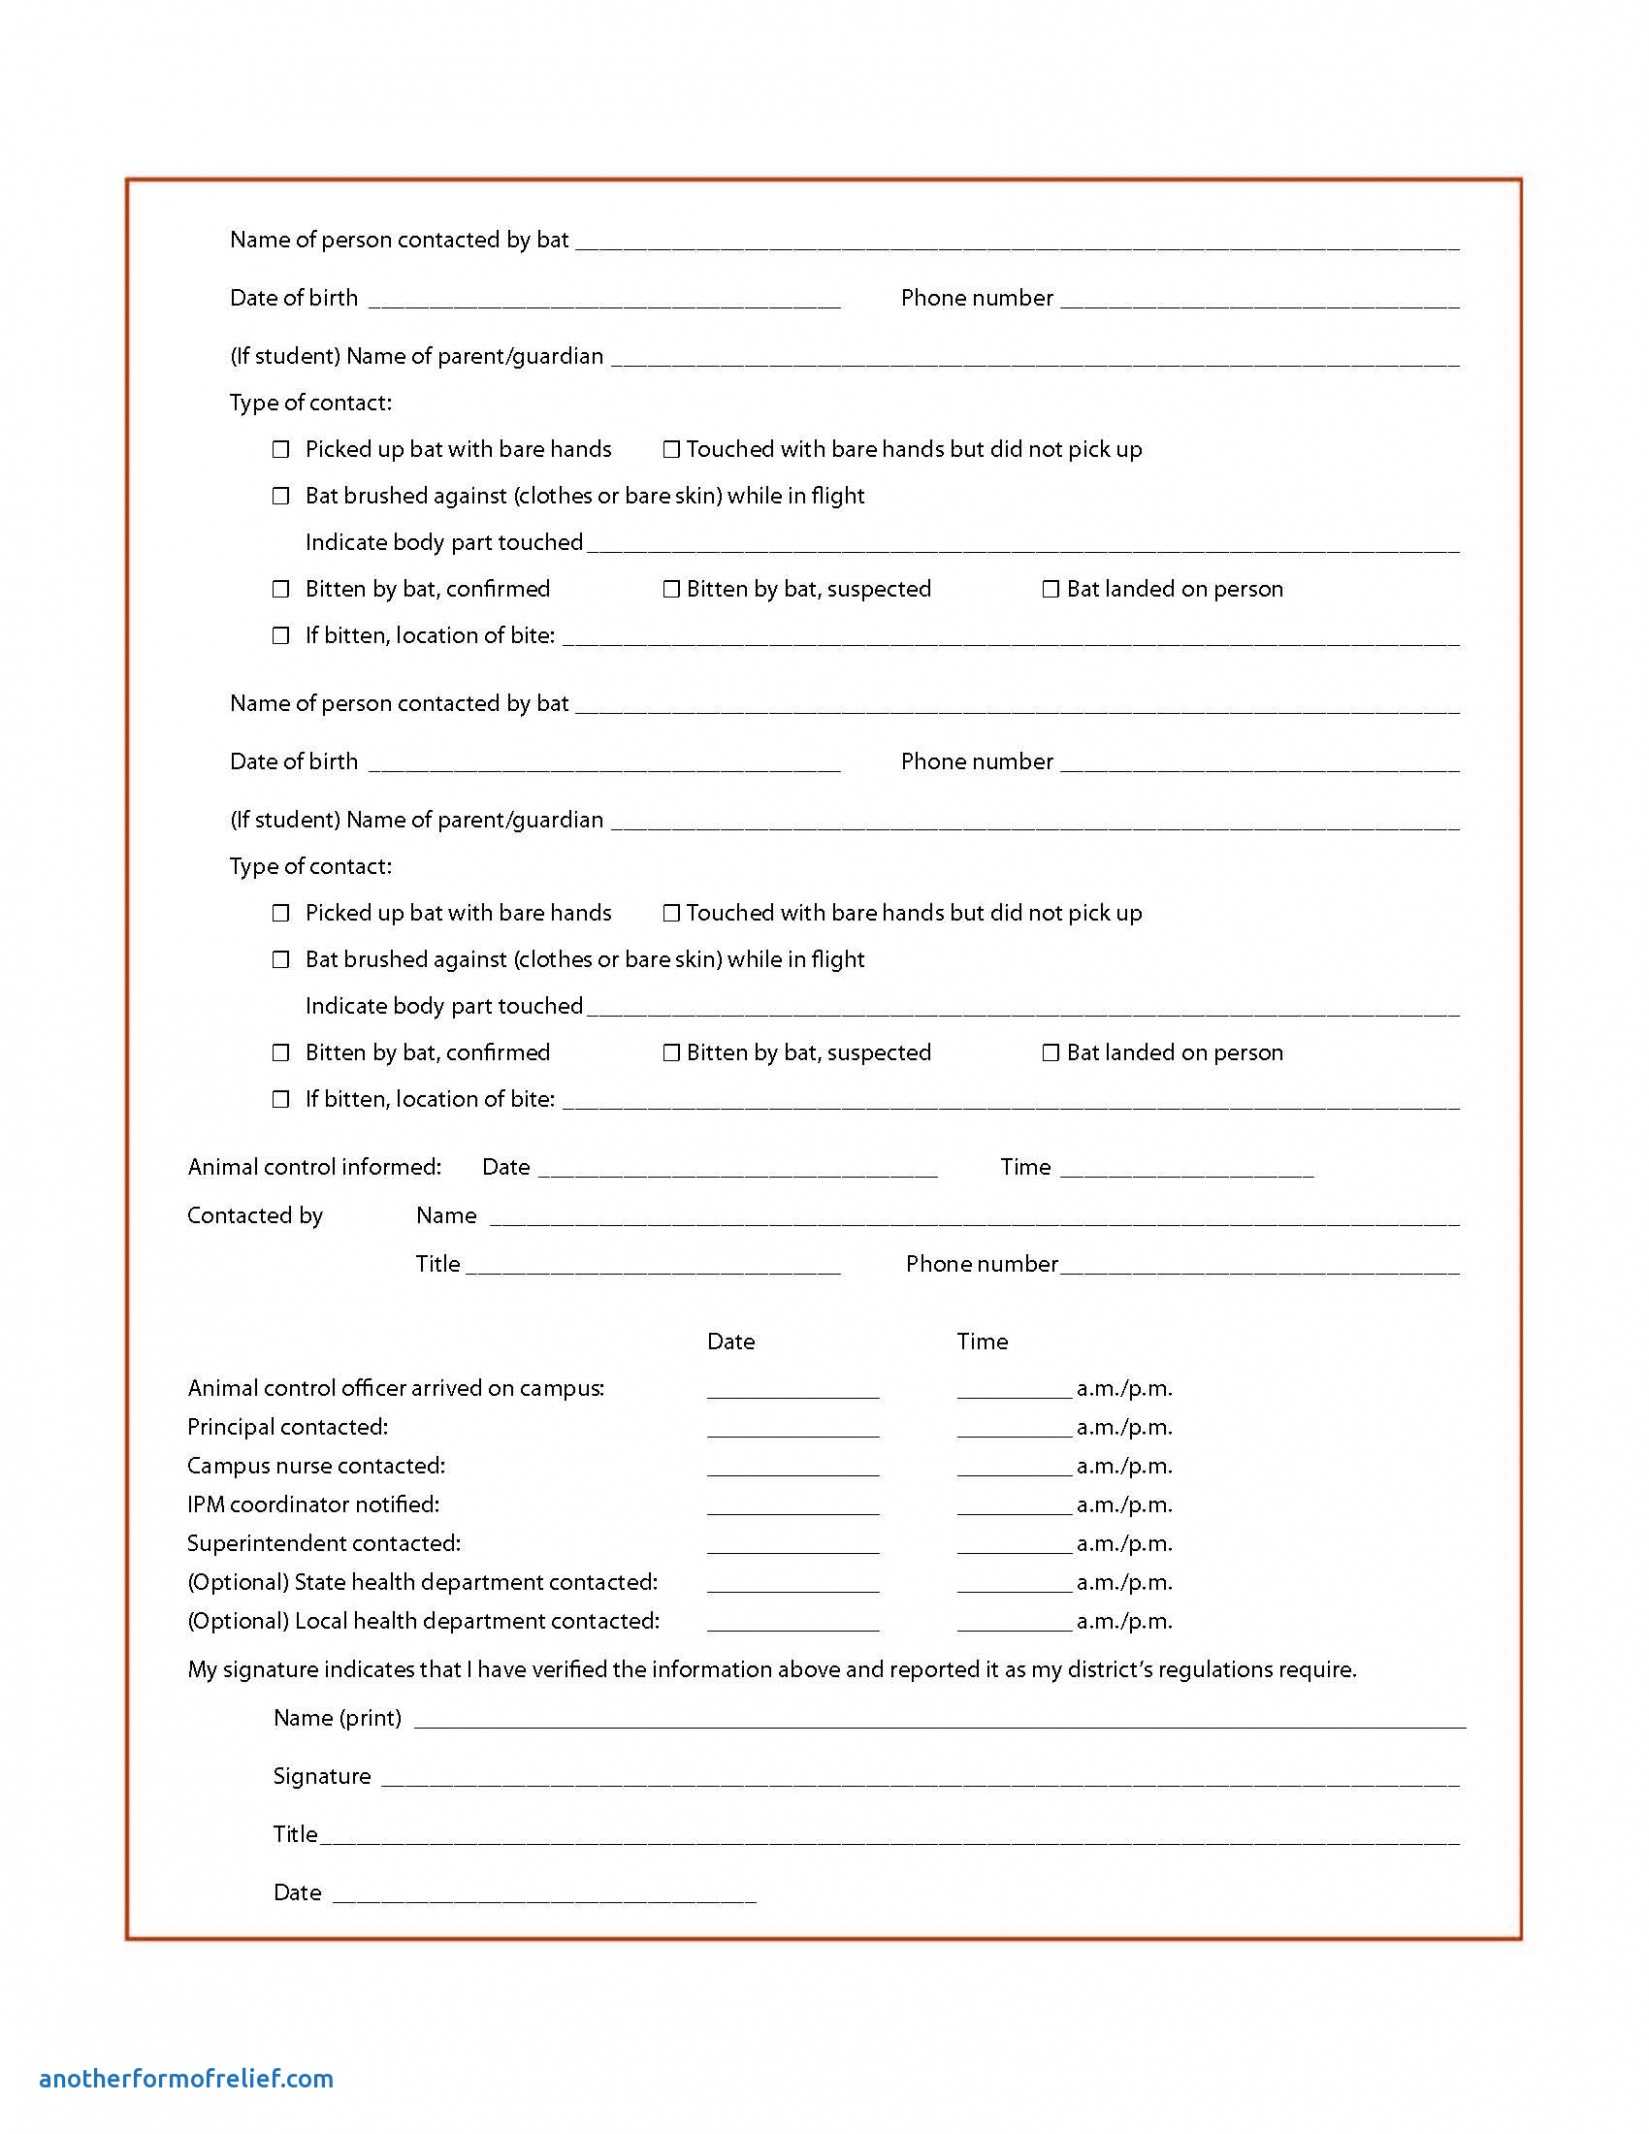 12+ Investigation Report Template | Sopexample Throughout Failure Investigation Report Template